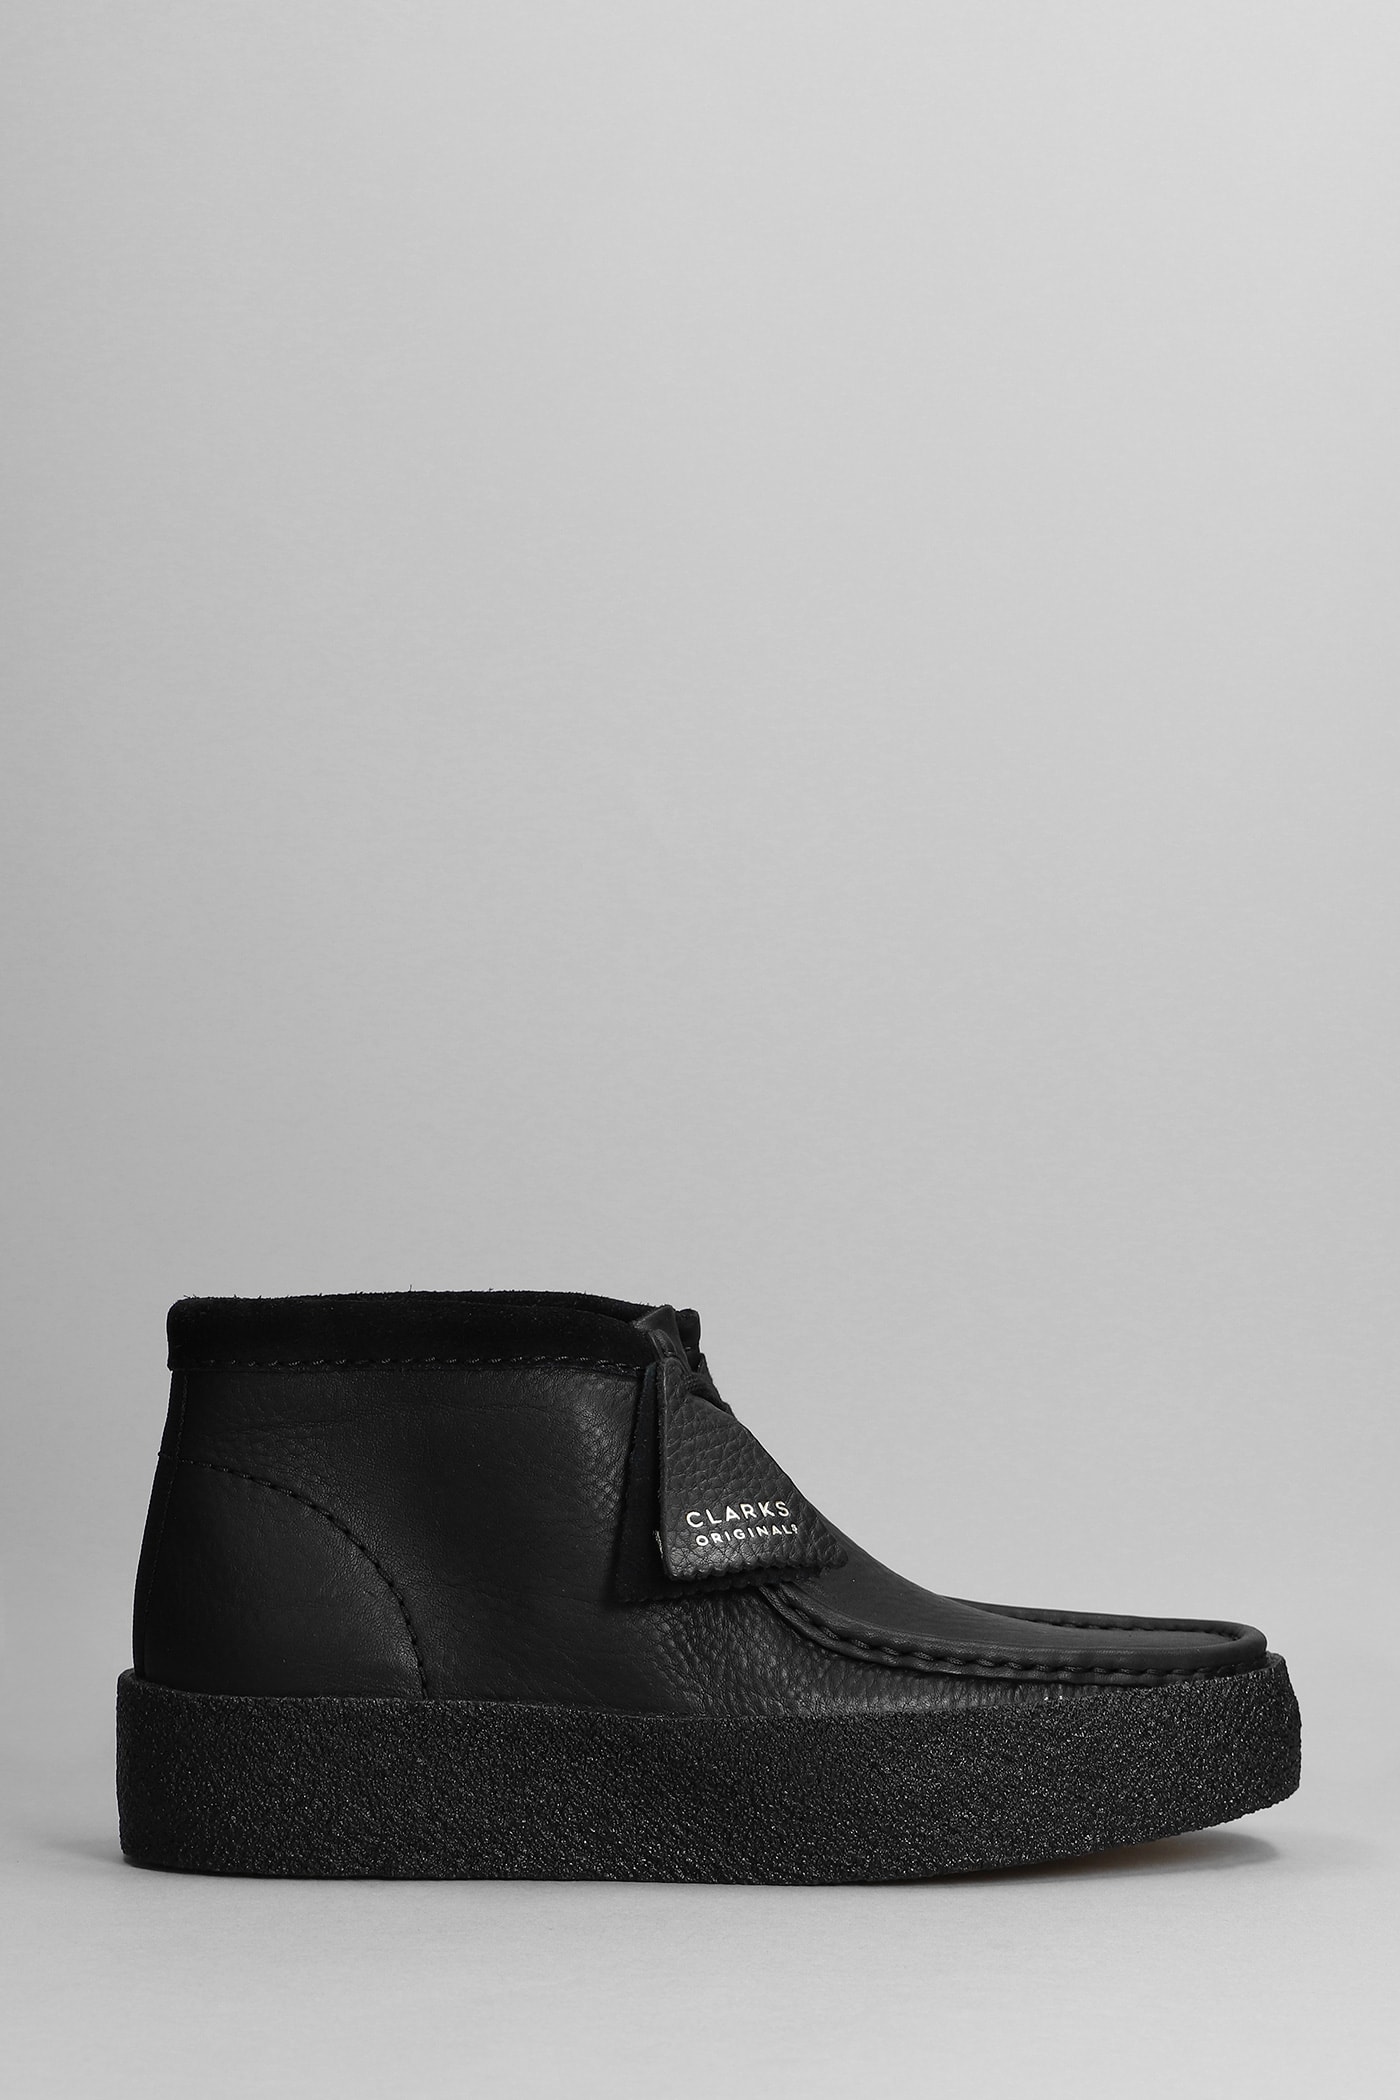 Clarks Wallabee Cup Bt Lace Up Shoes In Black Leather